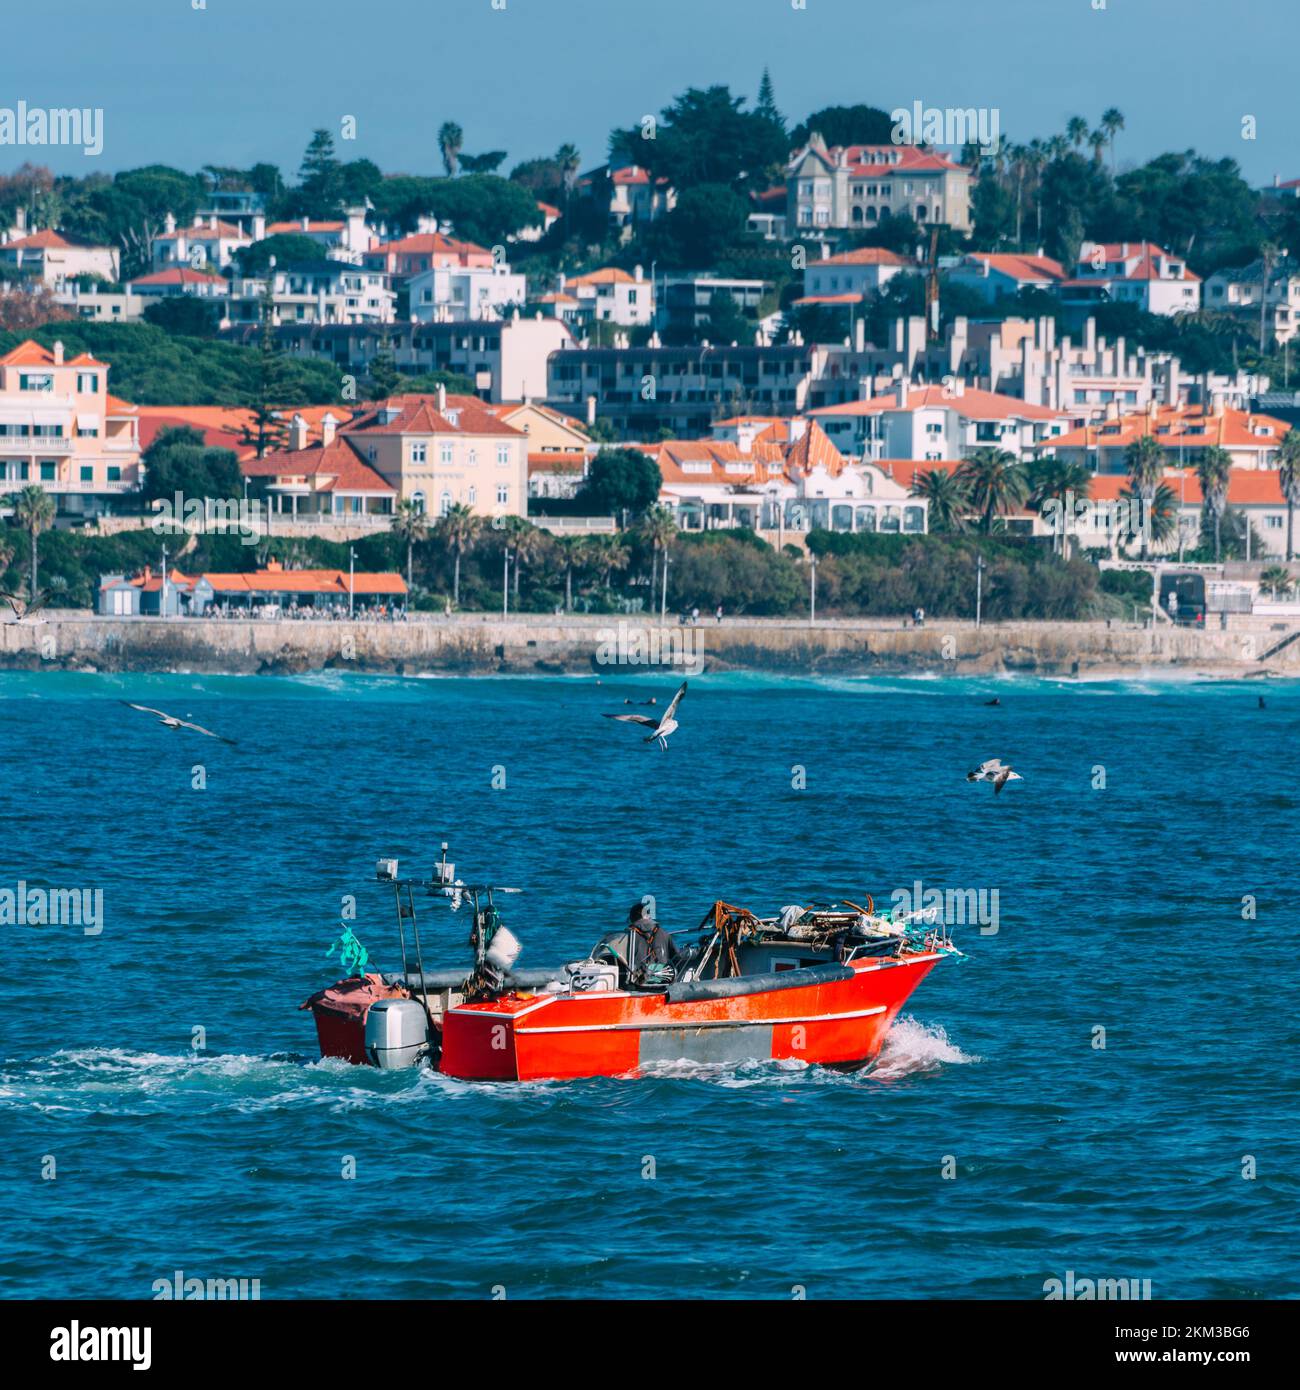 Lone unidentifiable fisherman on a wooden red boat on Estoril Bay in Estoril, Portugal Stock Photo